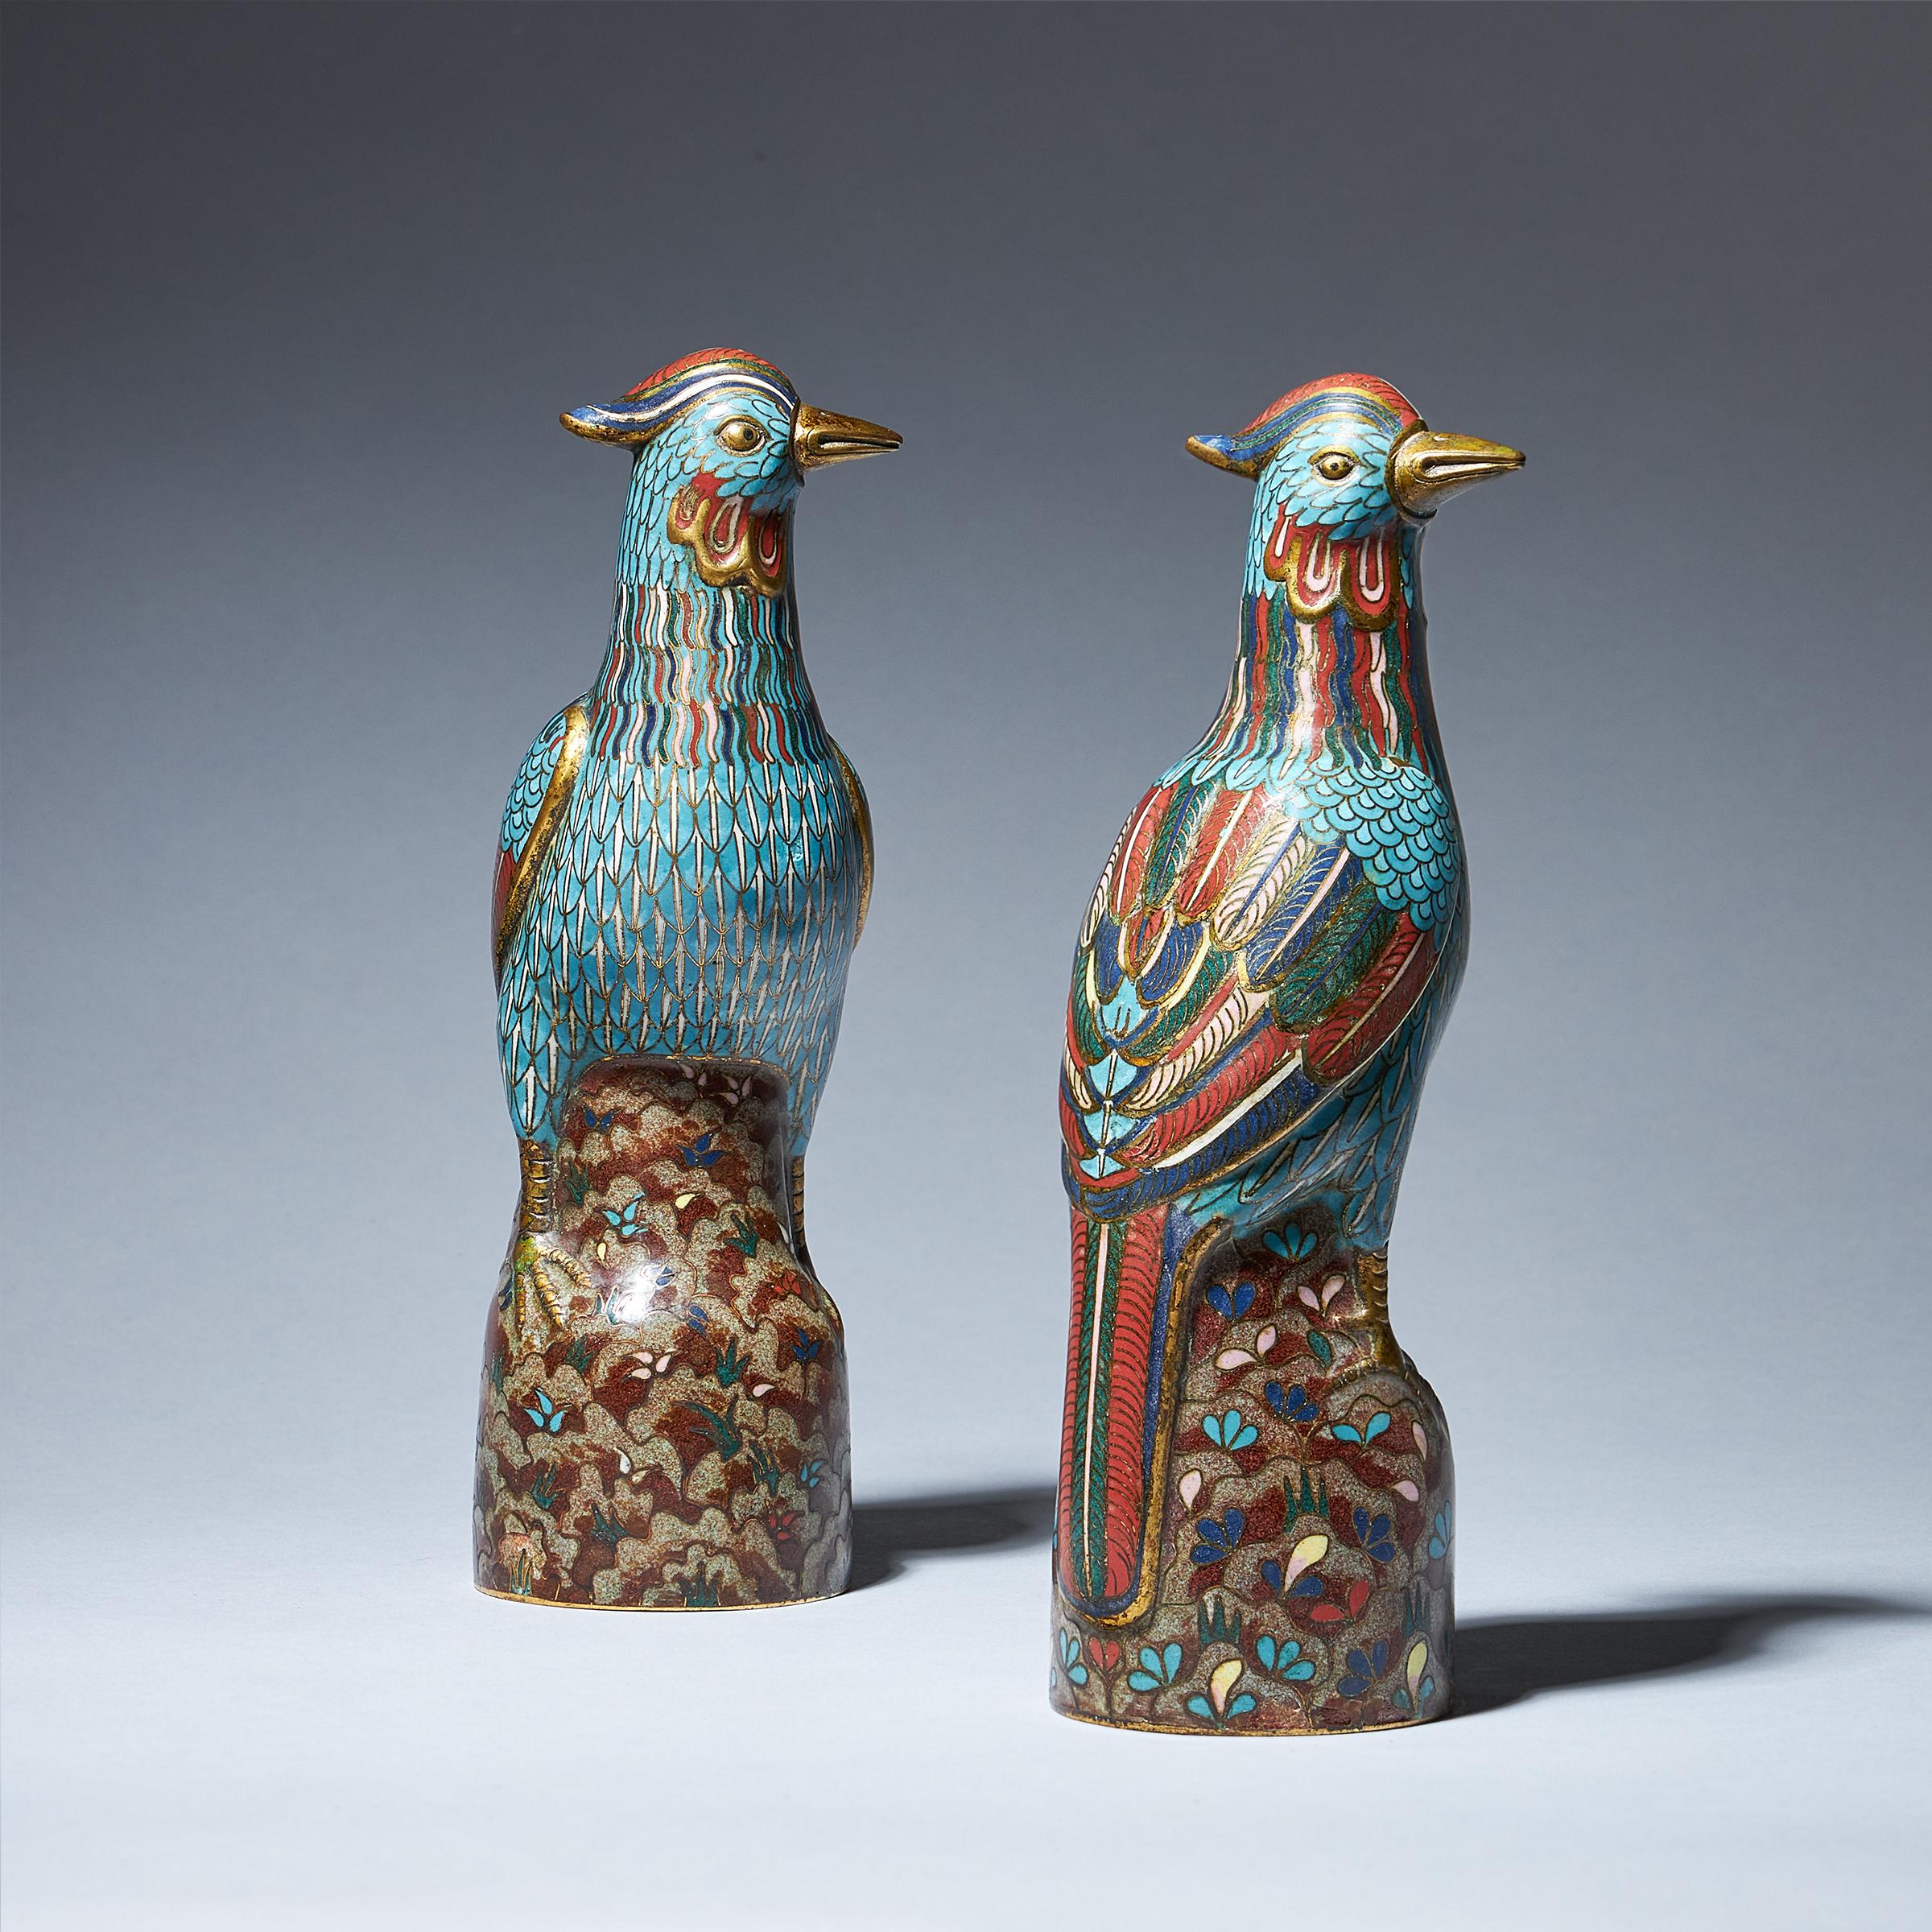 A Pair of 19th Century Late Qing Dynasty Chinese Cloisonné Phoenix Figures 1